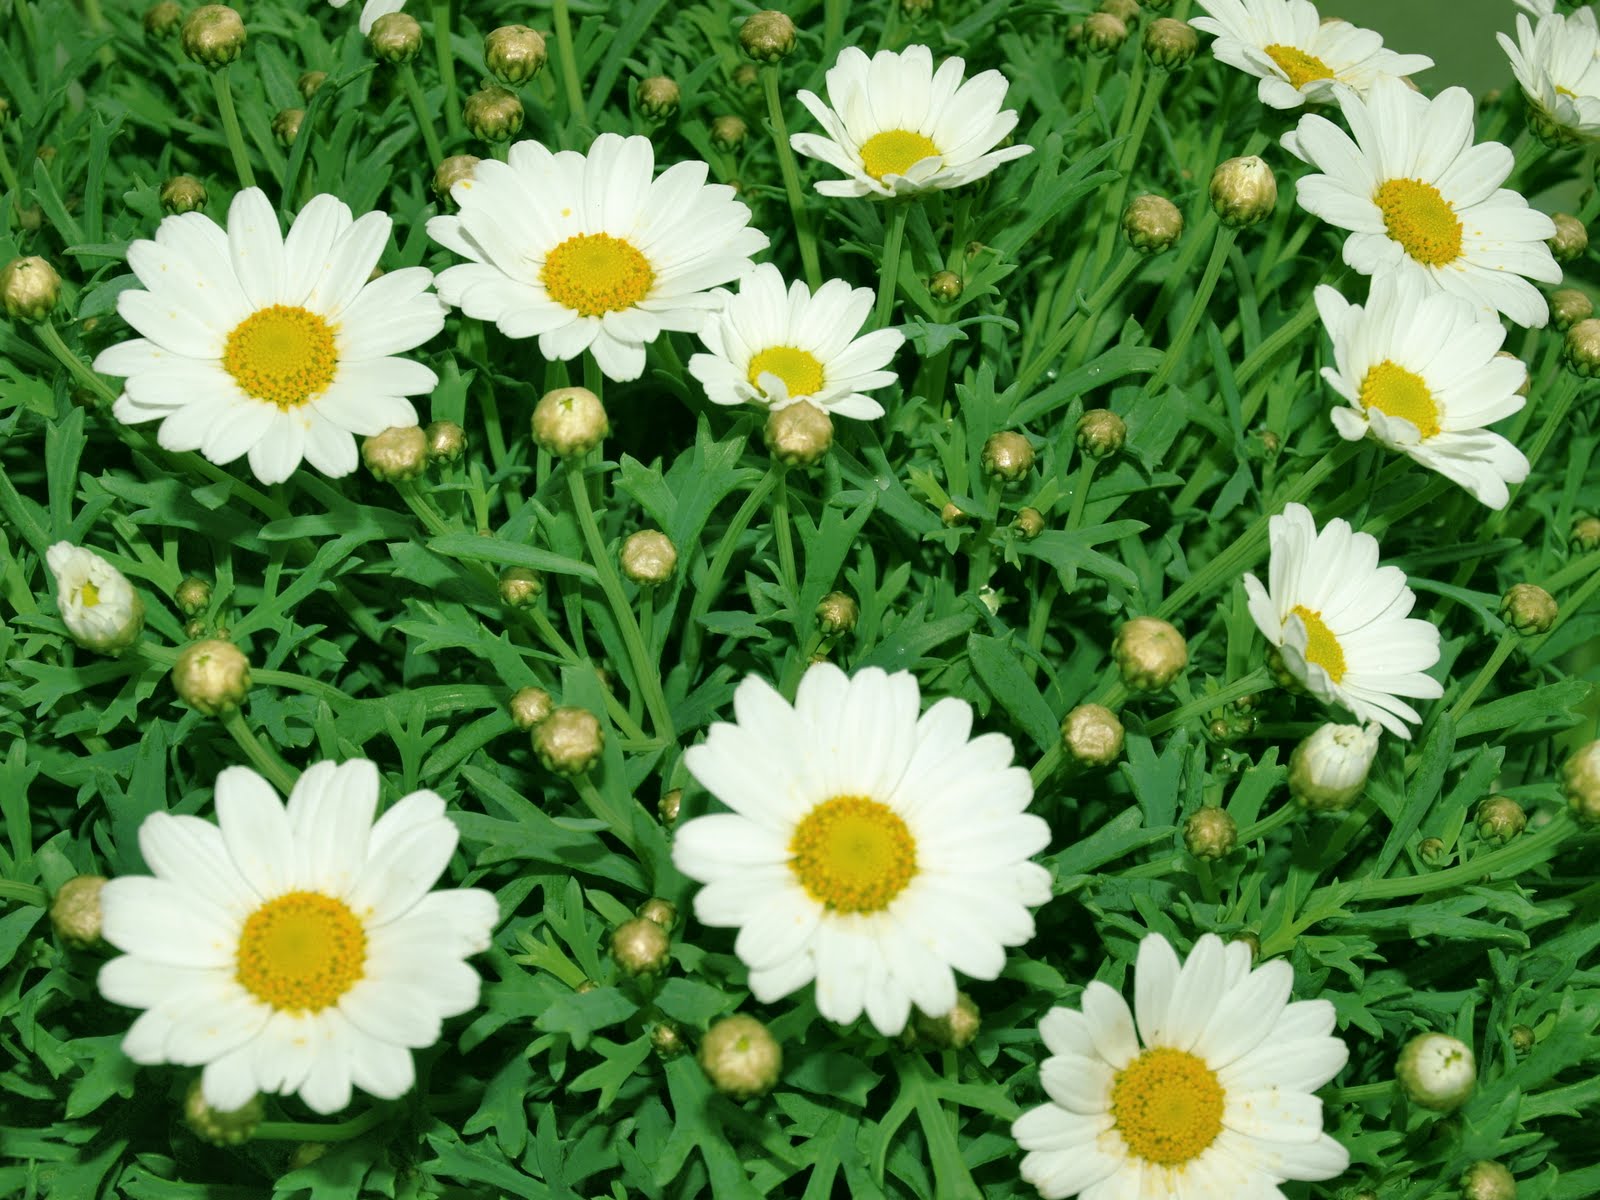 papatya wallpaper,flower,marguerite daisy,flowering plant,oxeye daisy,plant